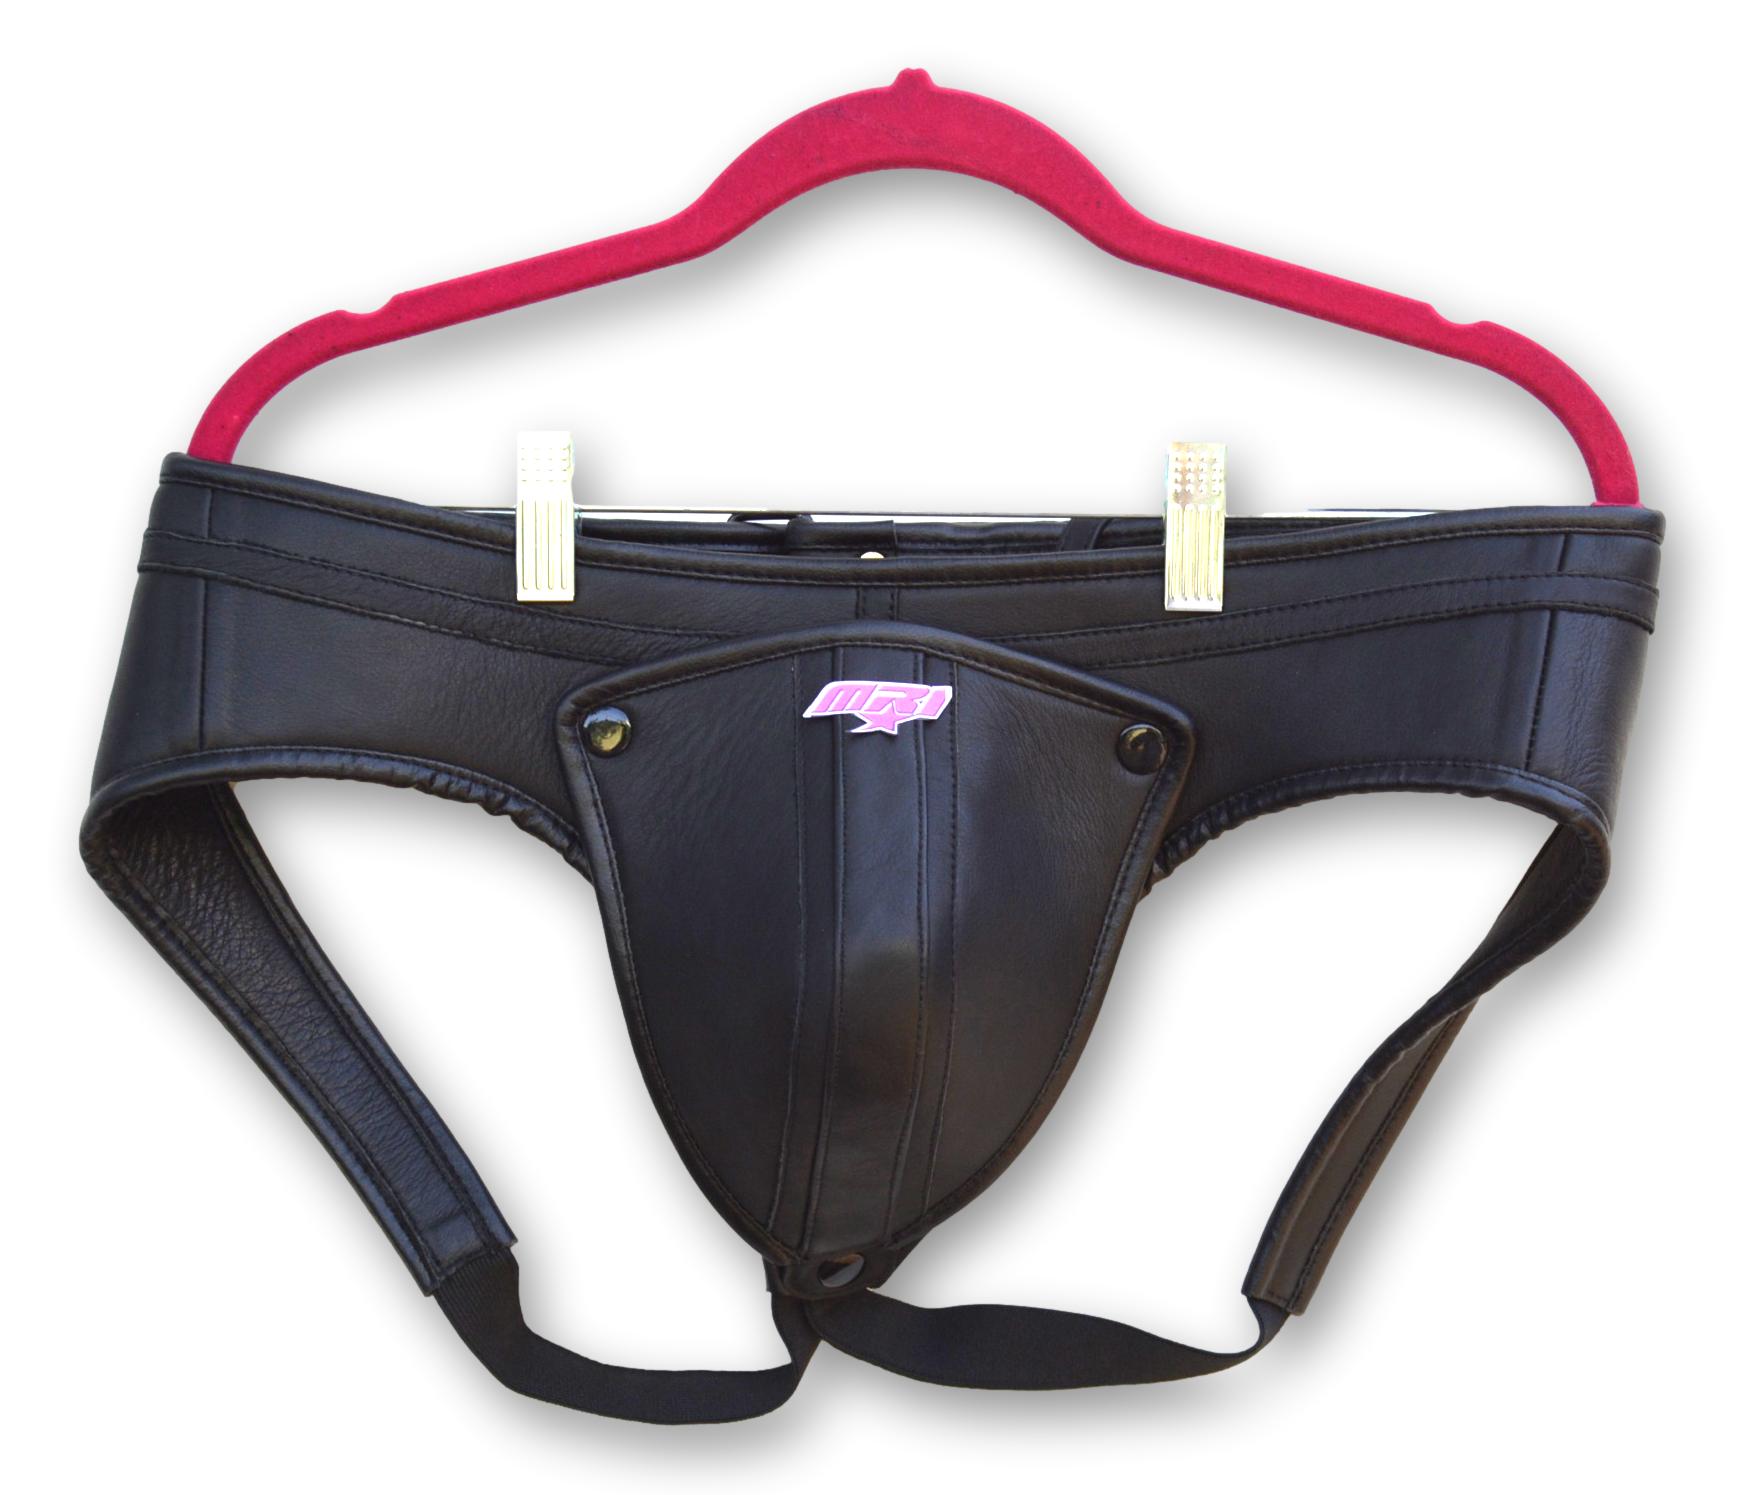 Men Black Leather Jock Strap, Men's Posing Pouch,Thong,G-String,Fetish,Gay,Sexy,Leather Underwear - MRI Leathers